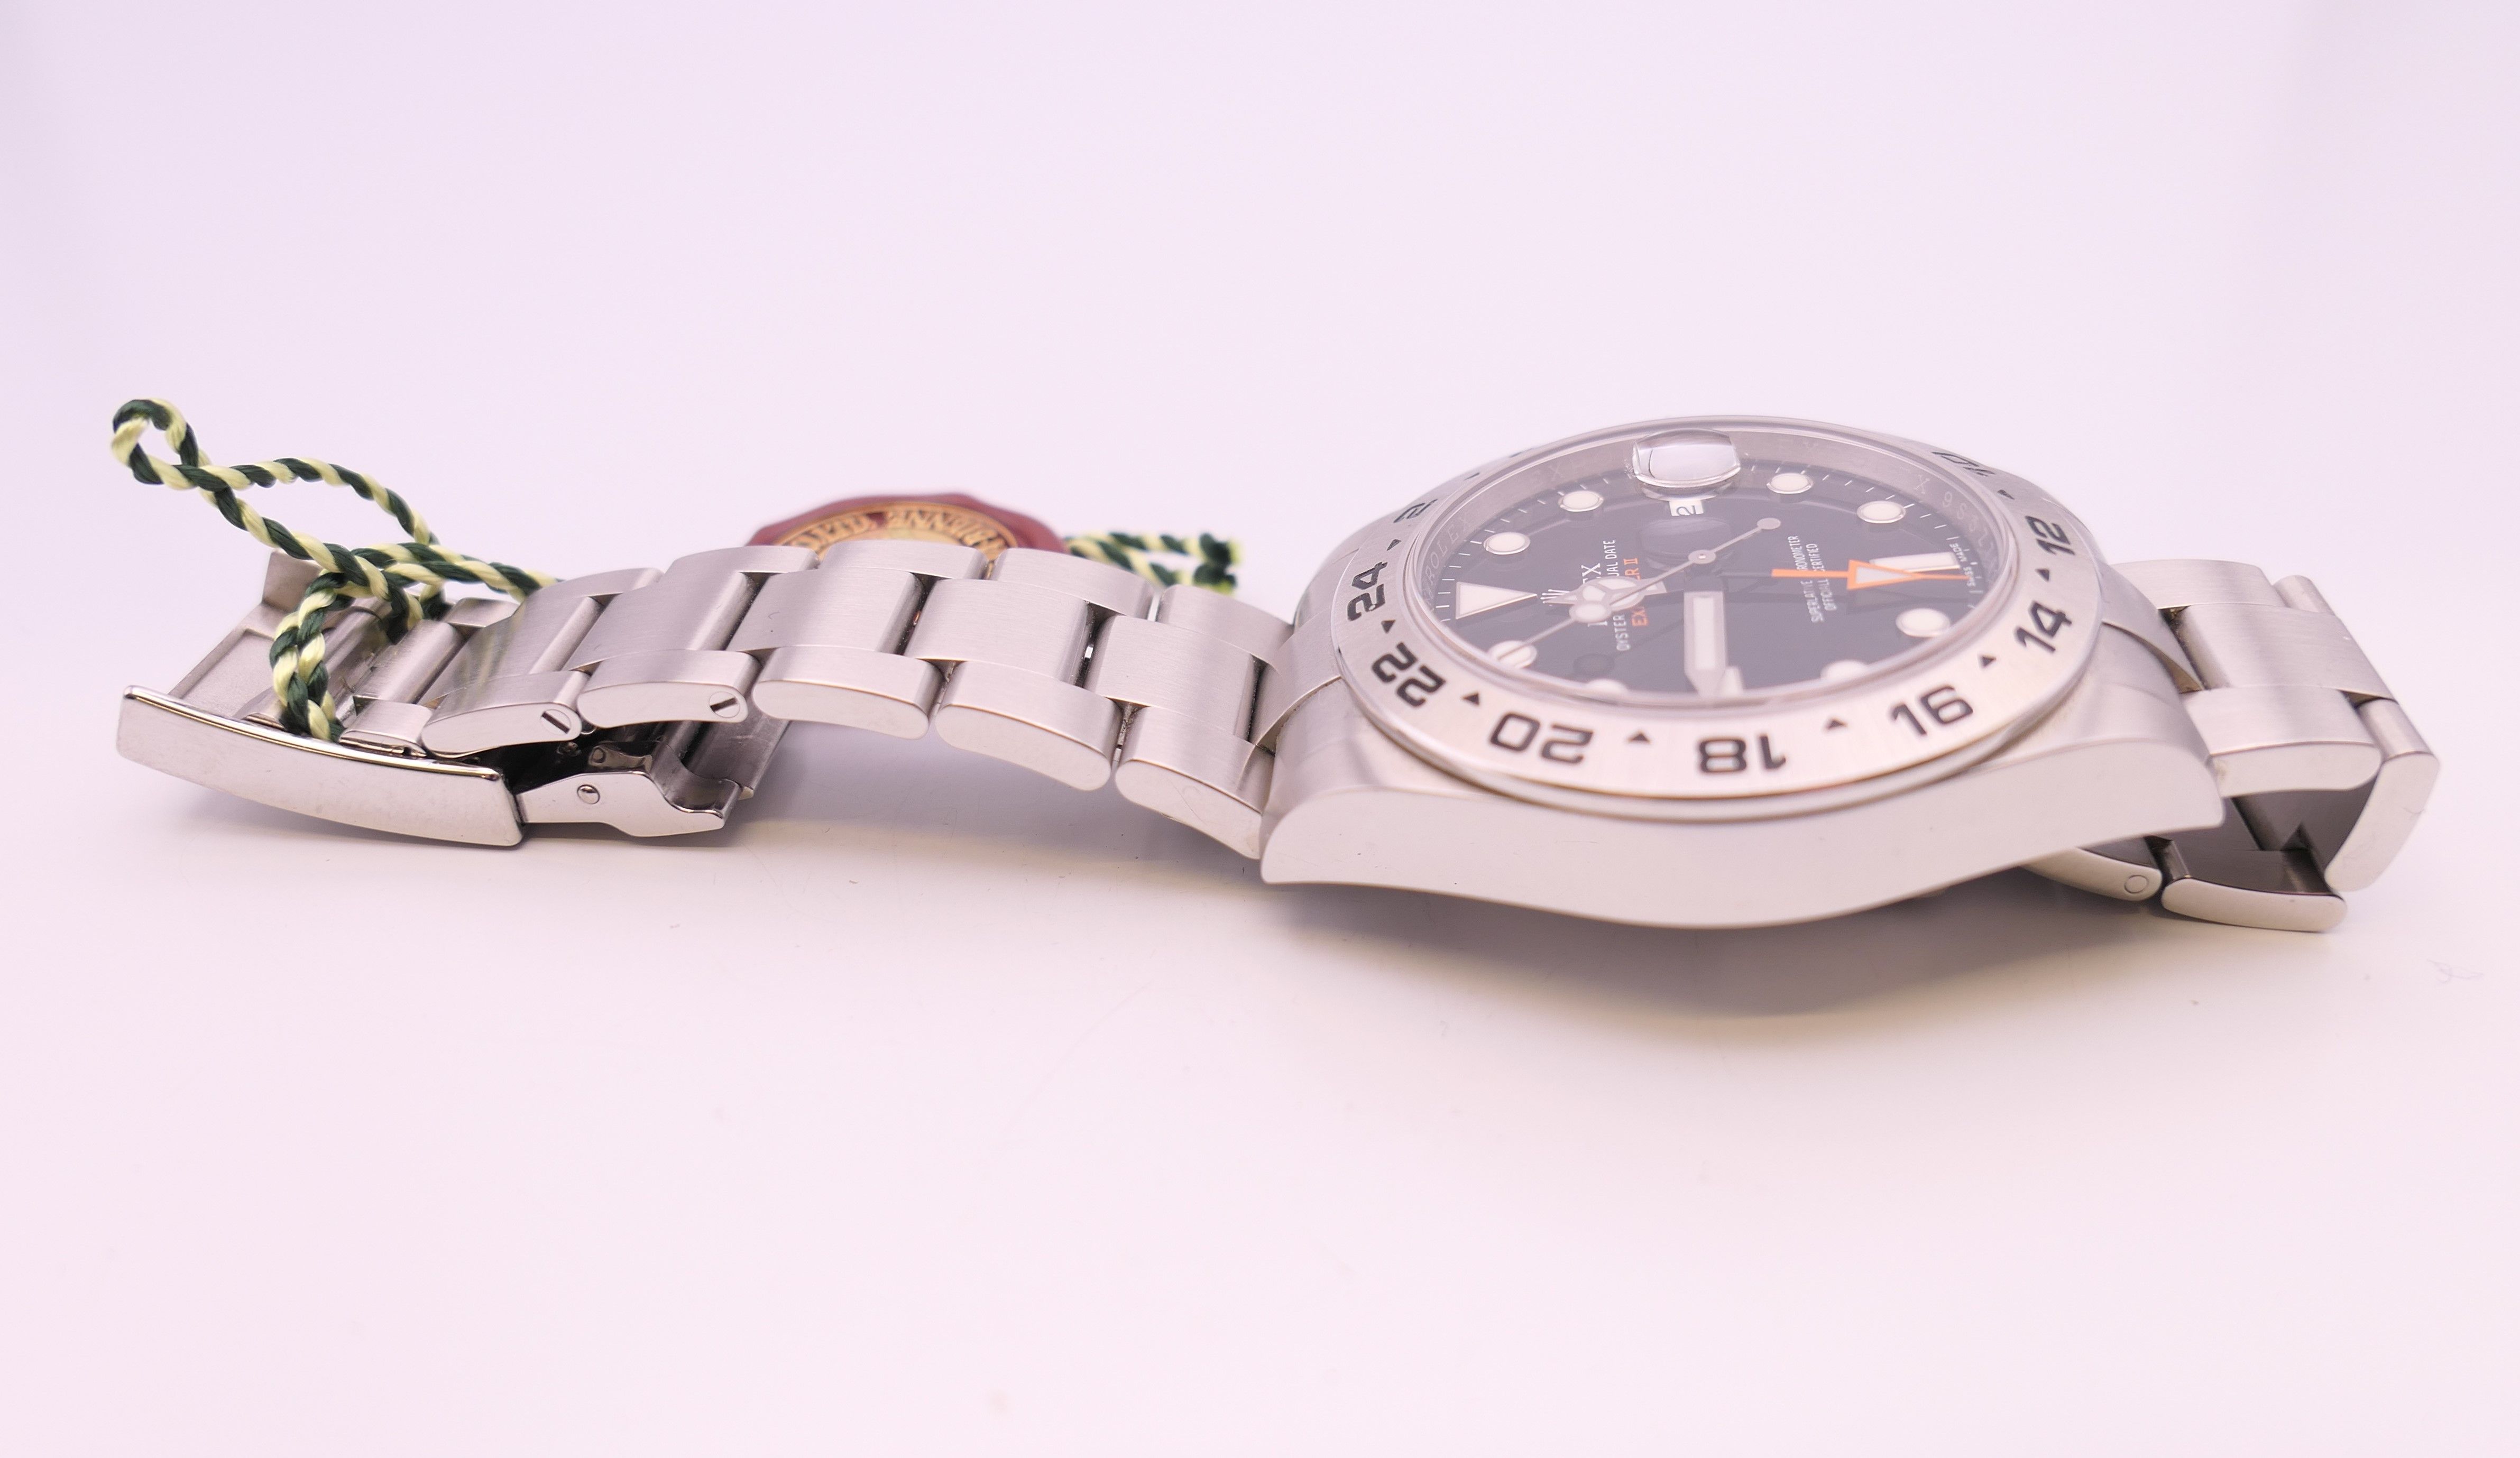 A Rolex Perpetual Date Explorer II watch with black dial, model number 216570, - Image 5 of 13